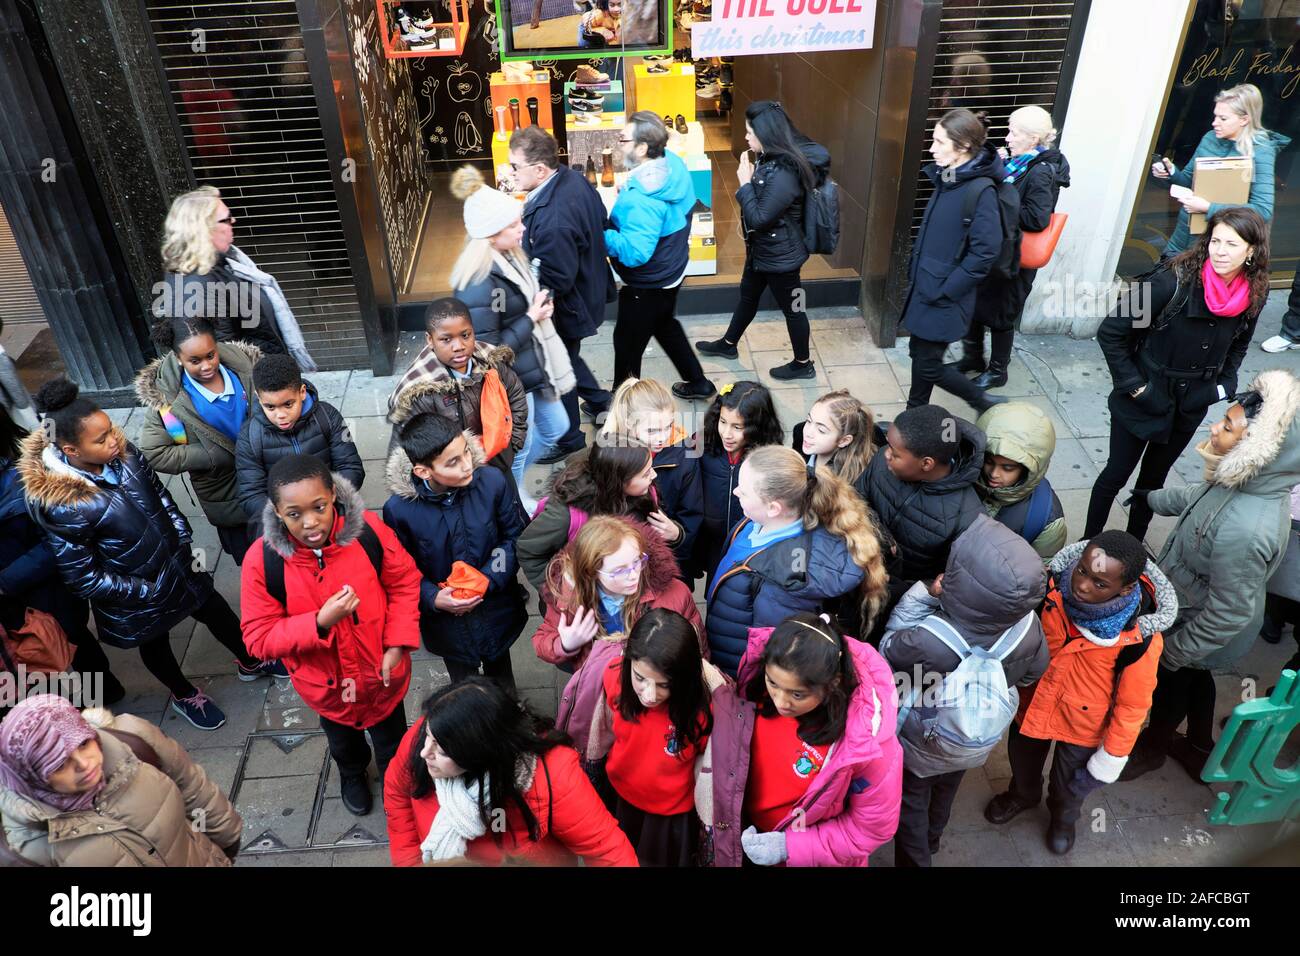 Group of school children waiting for a bus on a visit to Oxford Street in London England UK   KATHY DEWITT Stock Photo